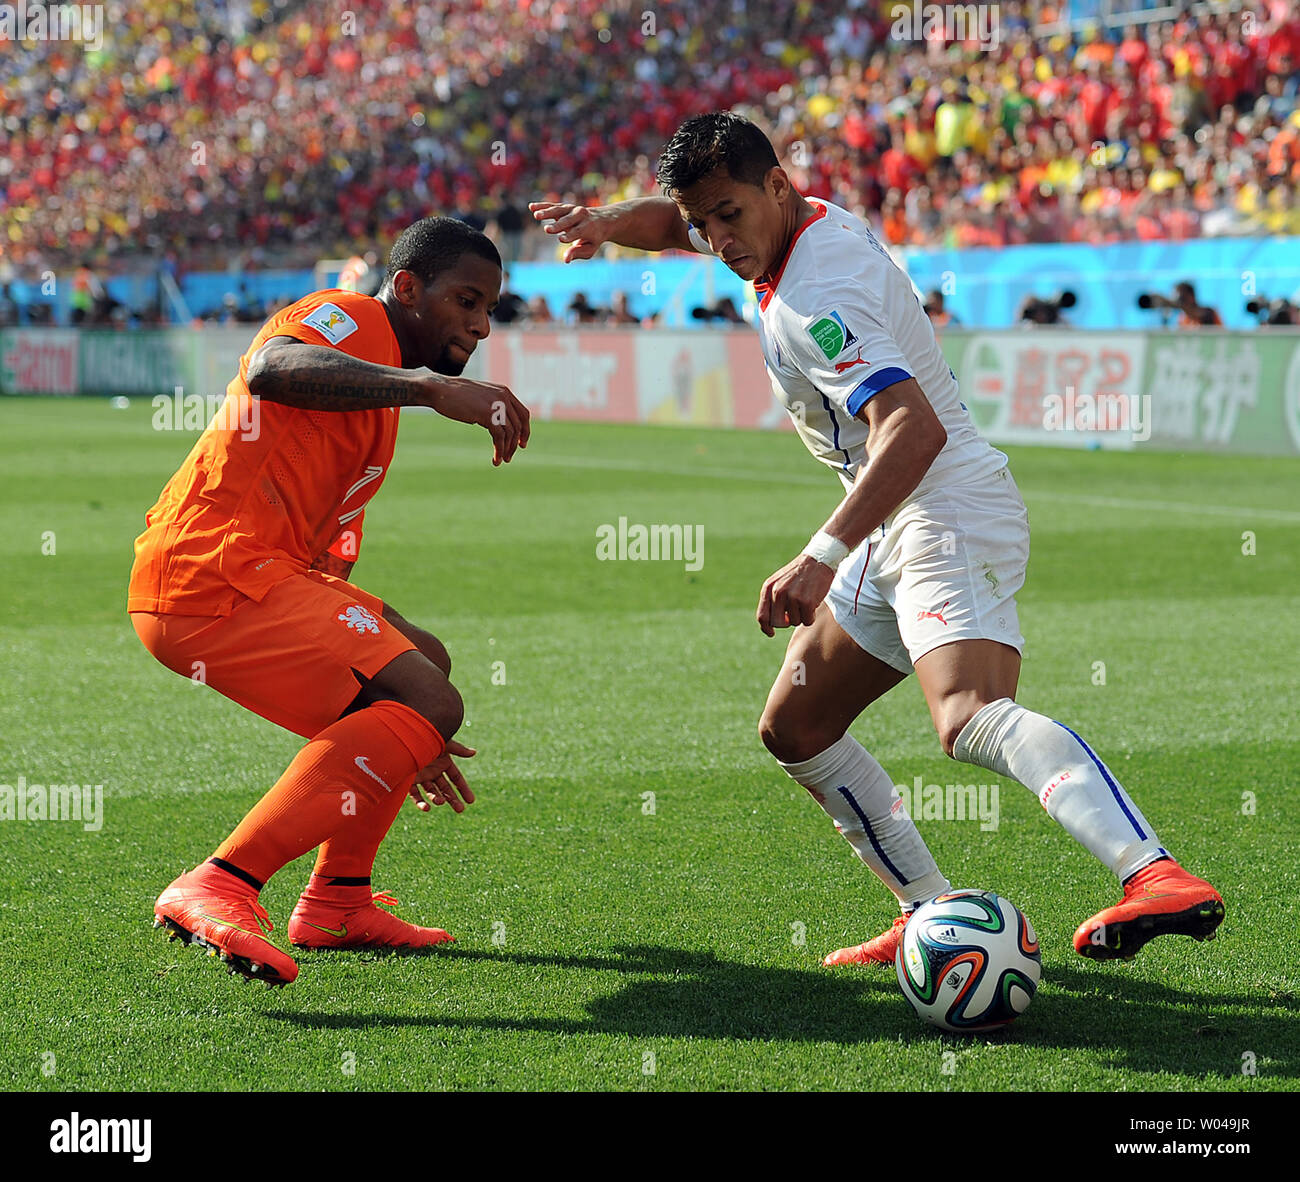 Jeremaine Lens (L) of the Netherlands competes with Alexis Sanchez of Chile during the 2014 FIFA World Cup Group B match at the Arena Corinthians in Sao Paulo, Brazil on June 23, 2014. UPI/Chris Brunskill Stock Photo